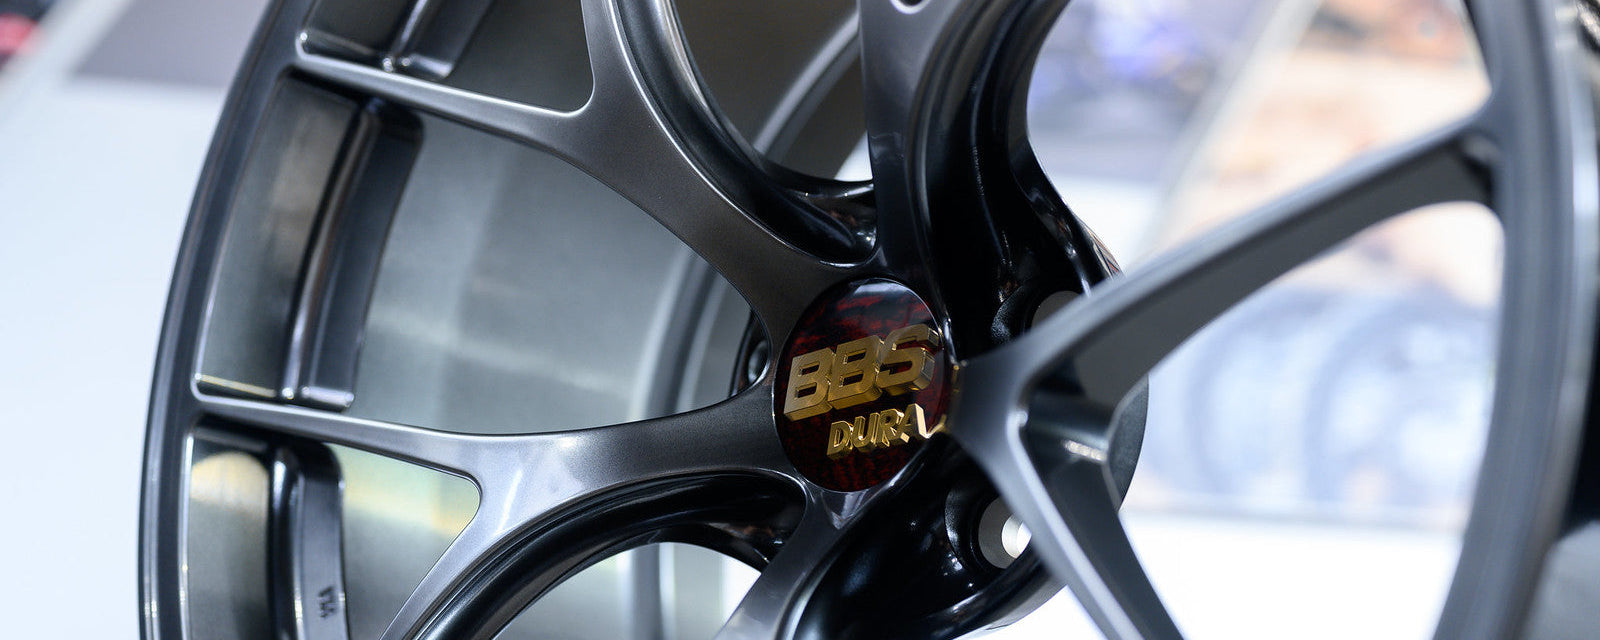 BBS RI-D - Premium Wheels from BBS Japan - From just $10290.00! Shop now at MK MOTORSPORTS